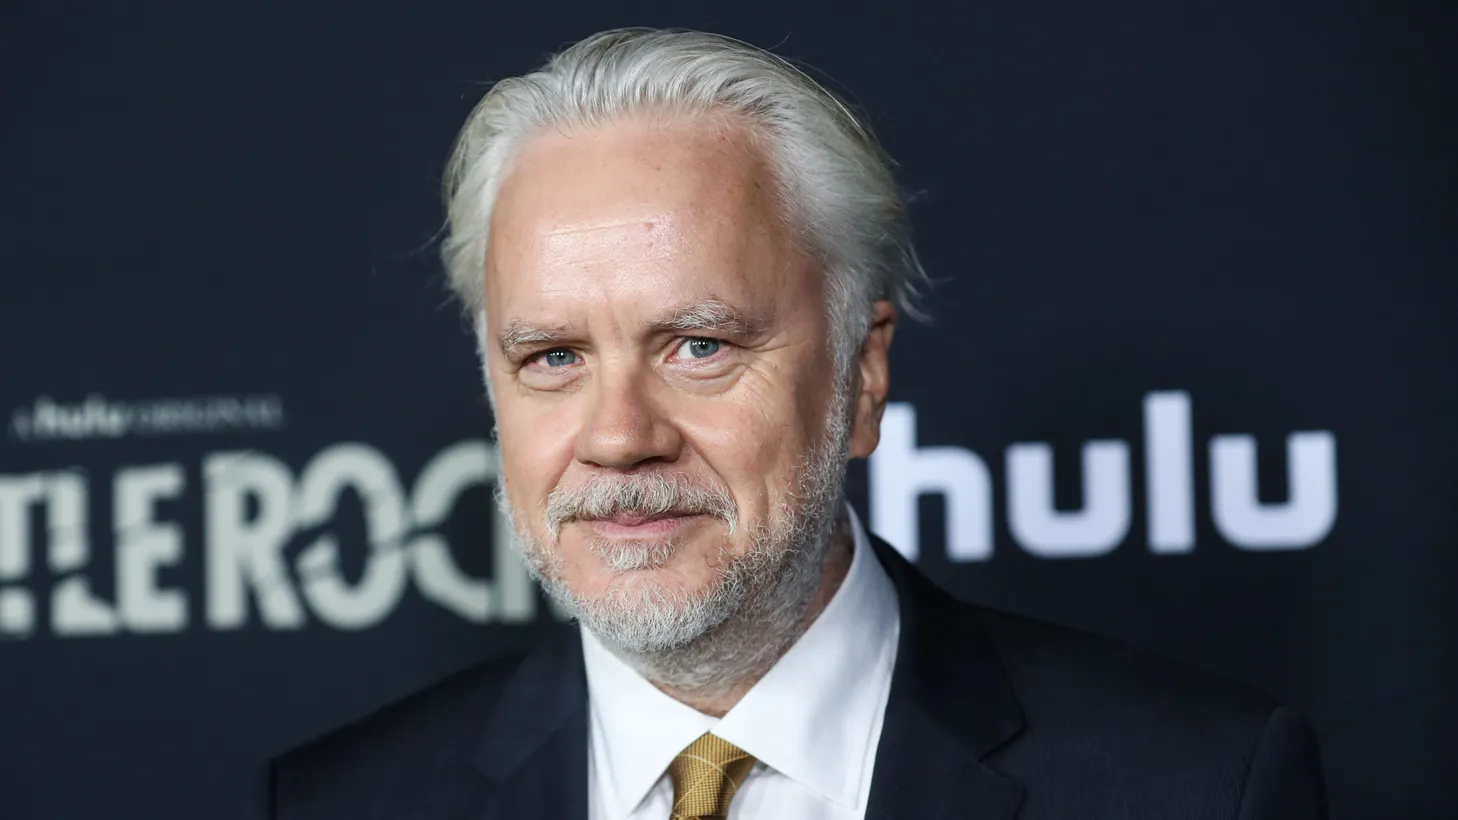 Actor Tim Robbins on October 14, 2019 in West Hollywood, Los Angeles, California.